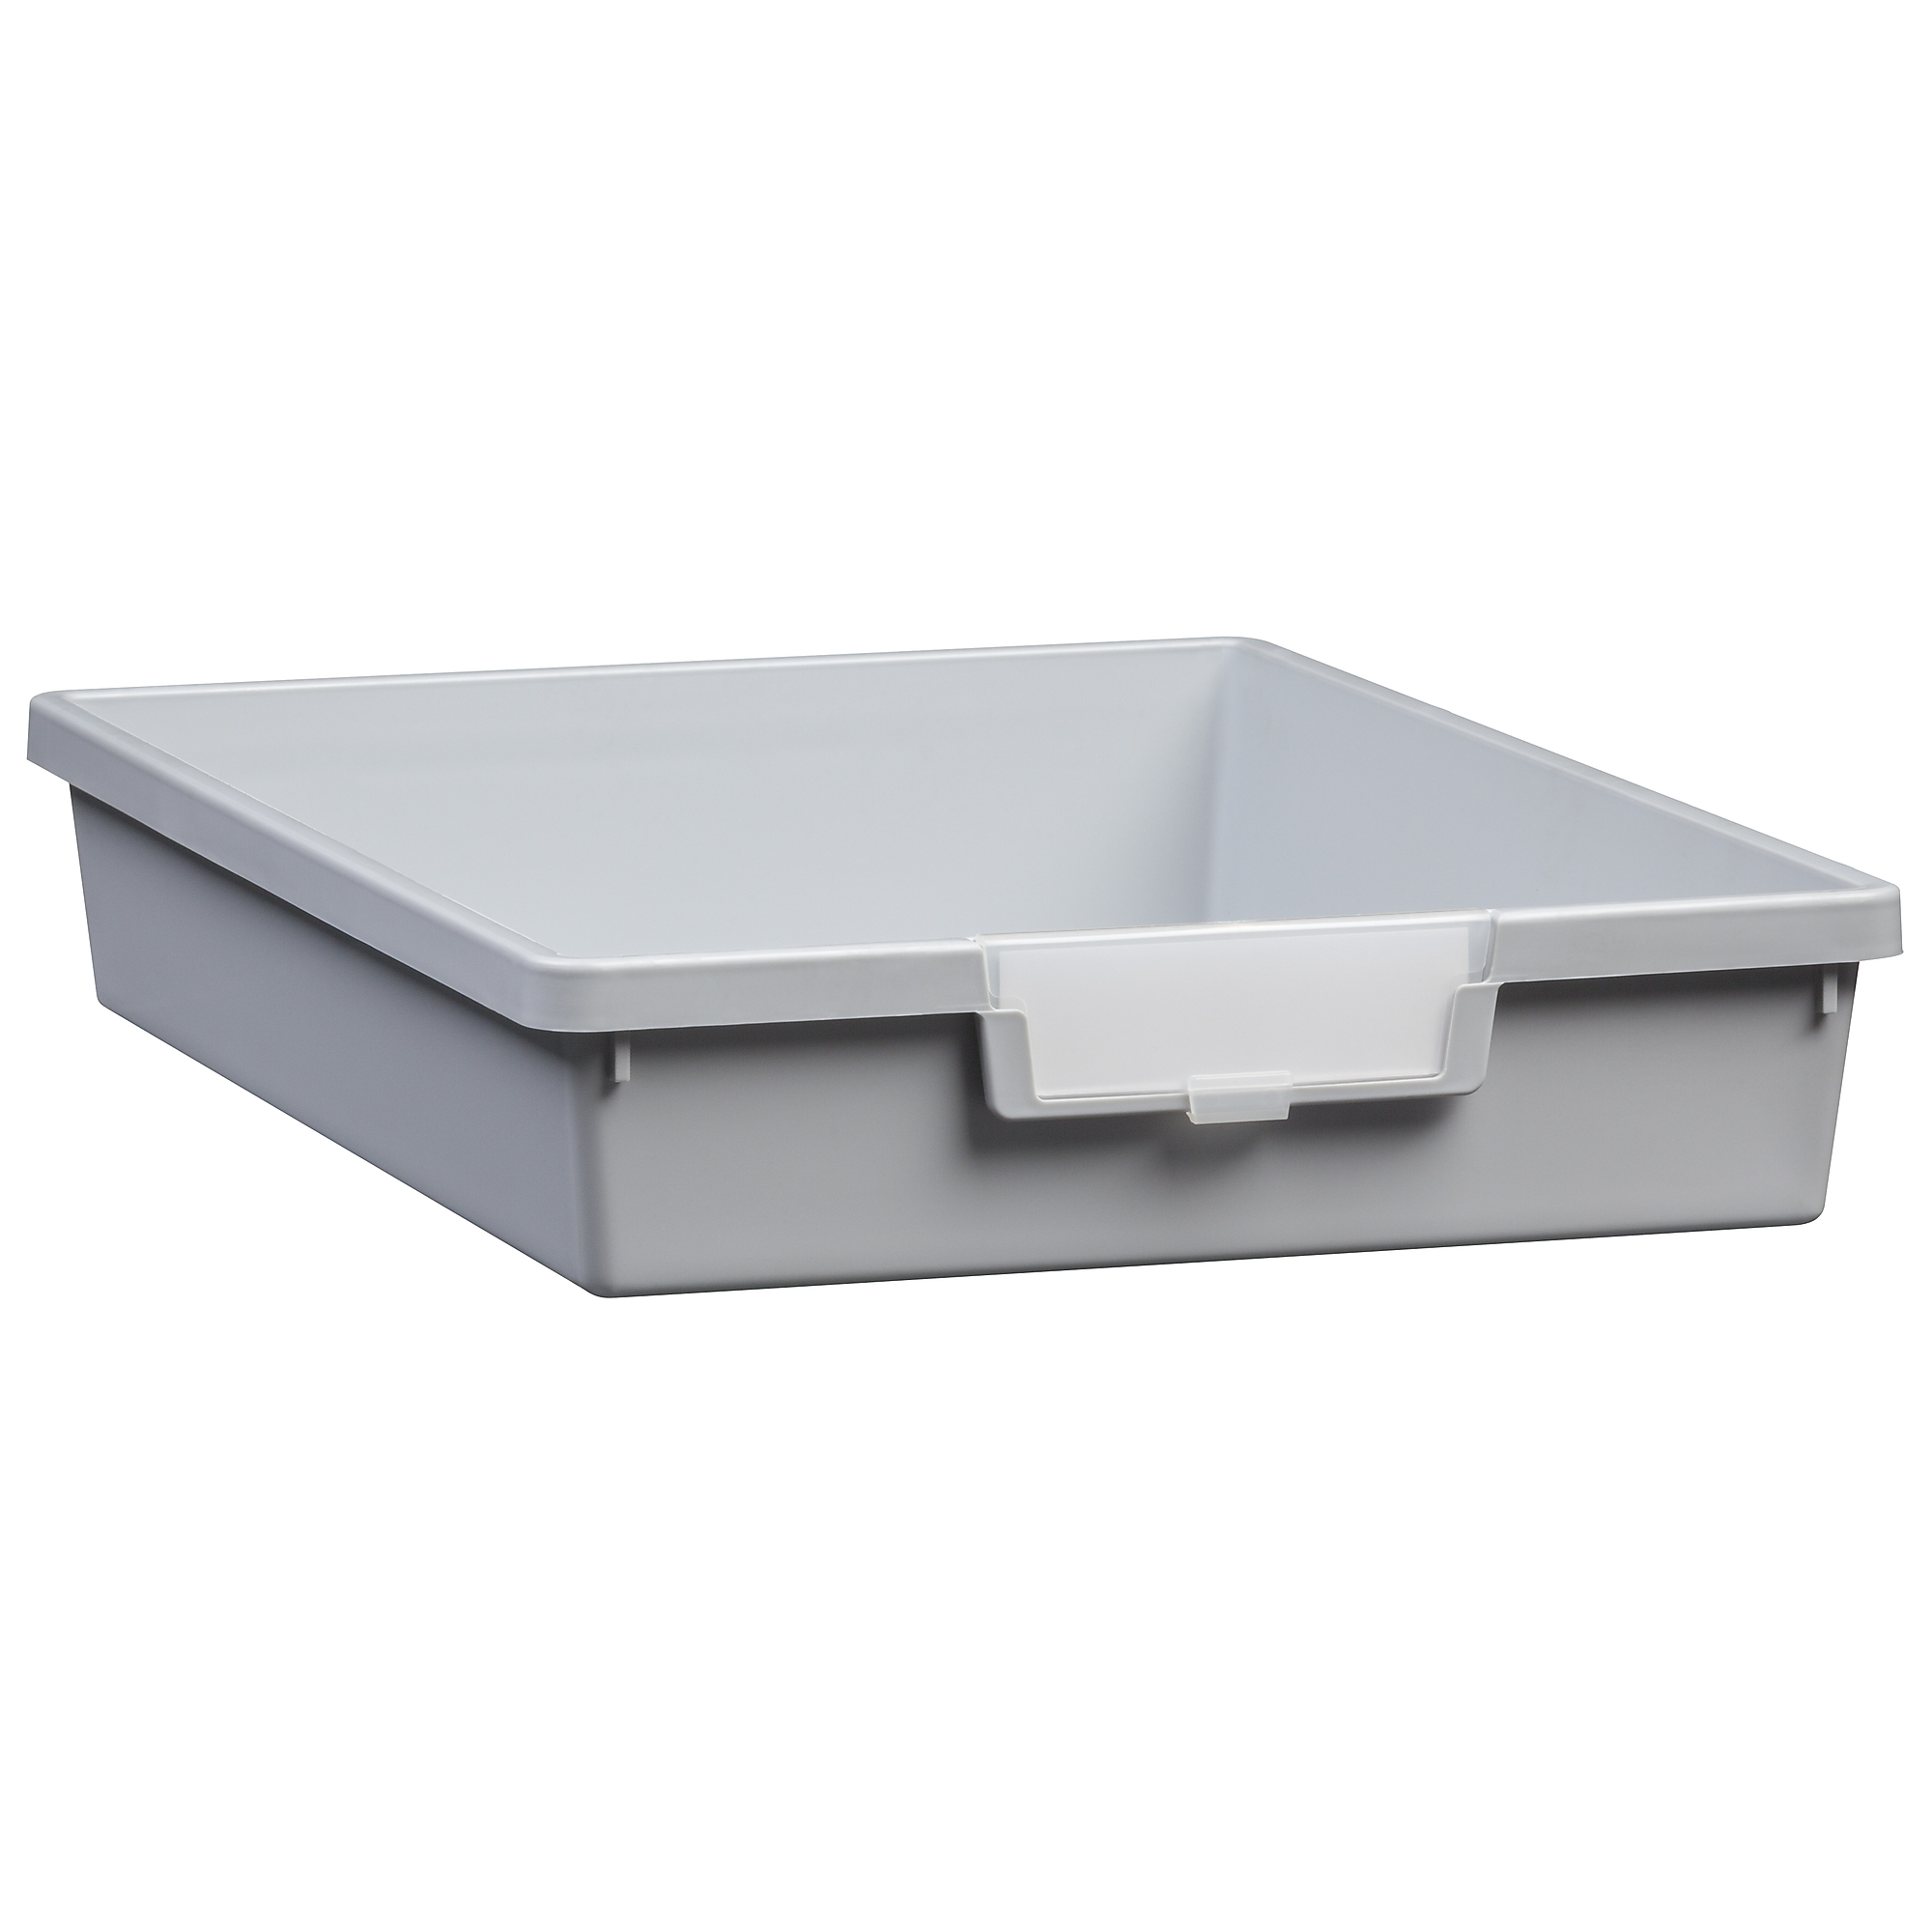 Certwood StorWerks, Slim Line 3Inch Tray in Light Gray-1PK, Included (qty.) 1 Height 3 in, Model CE1950LG1